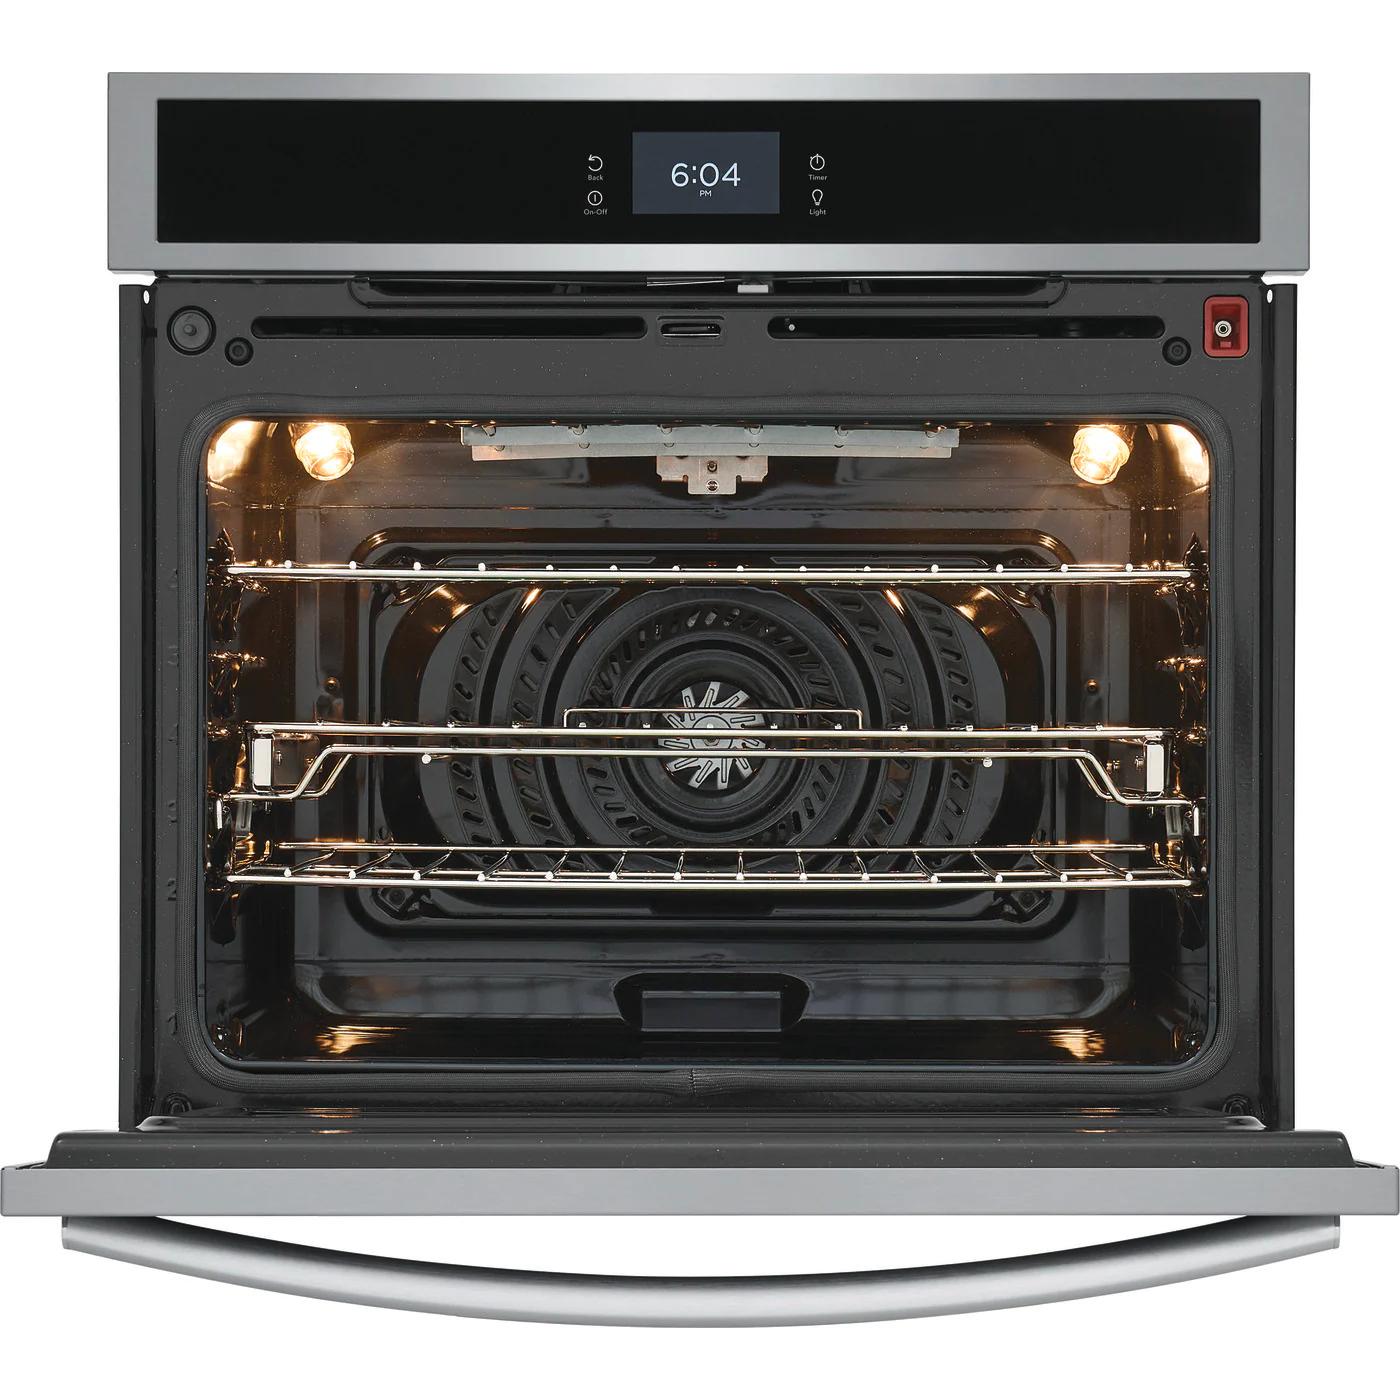 Frigidaire Gallery 30-inch, 5.3 cu.ft. Built-in Single Wall Oven with Air Fry Technology GCWS3067AF